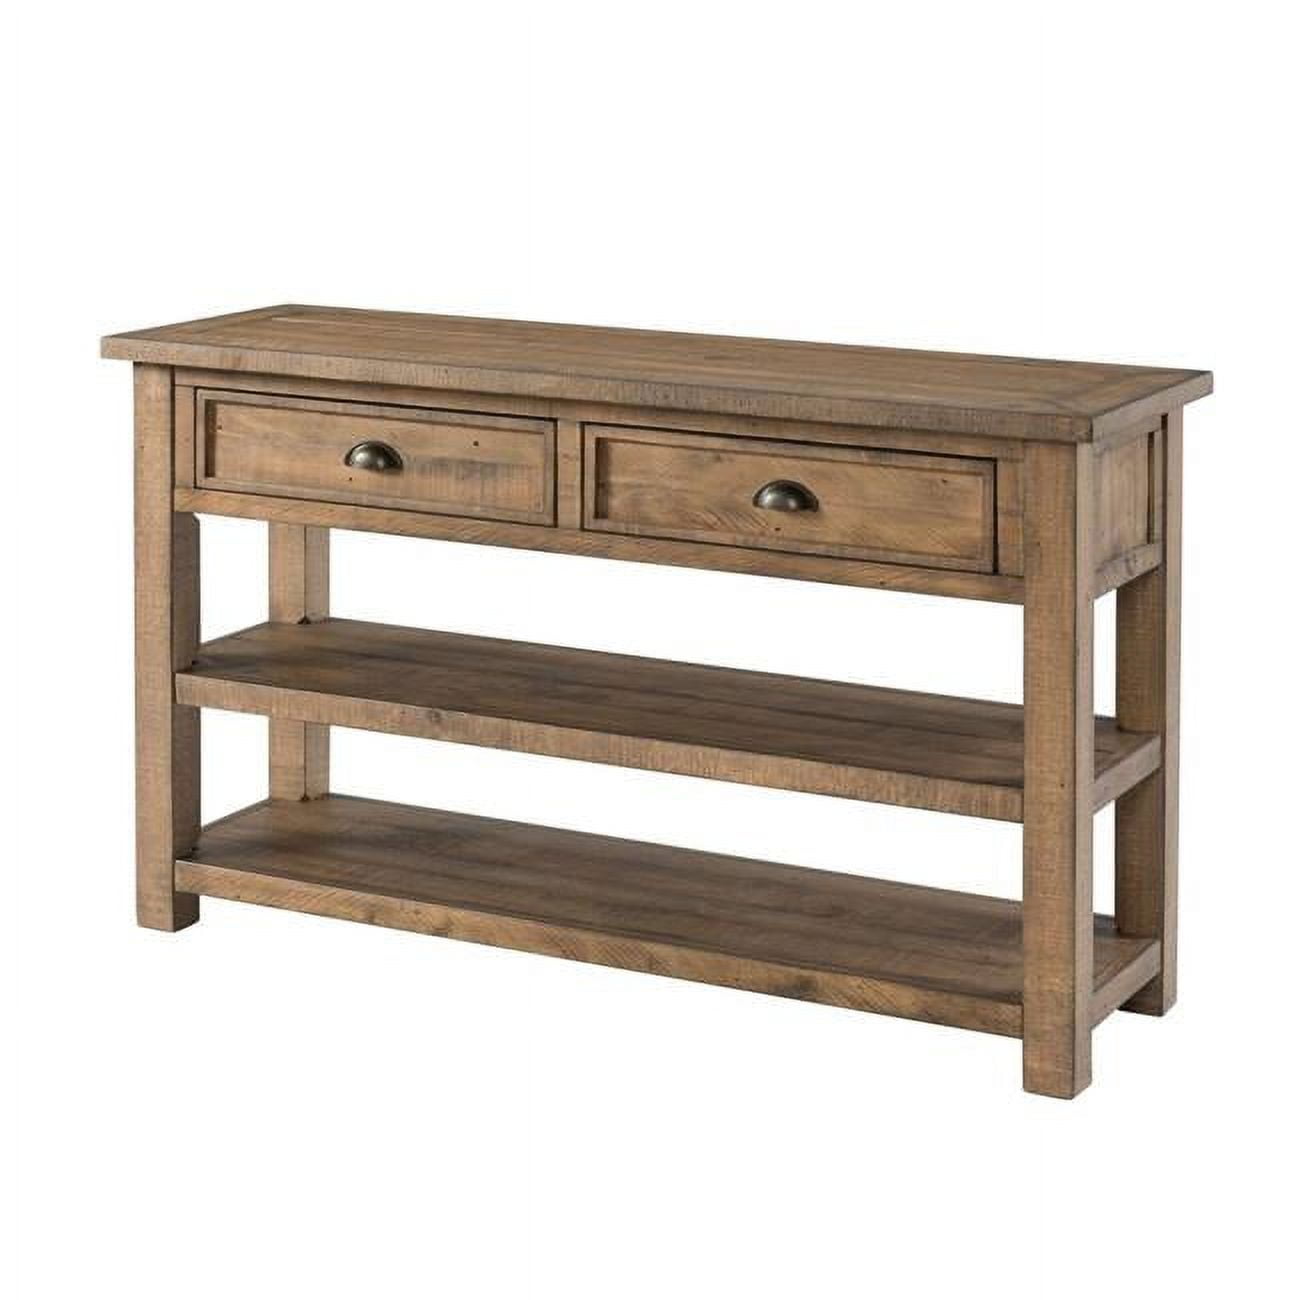 Bm205978 Coastal Style Rectangular Wooden Console Table With 2 Drawer, Brown